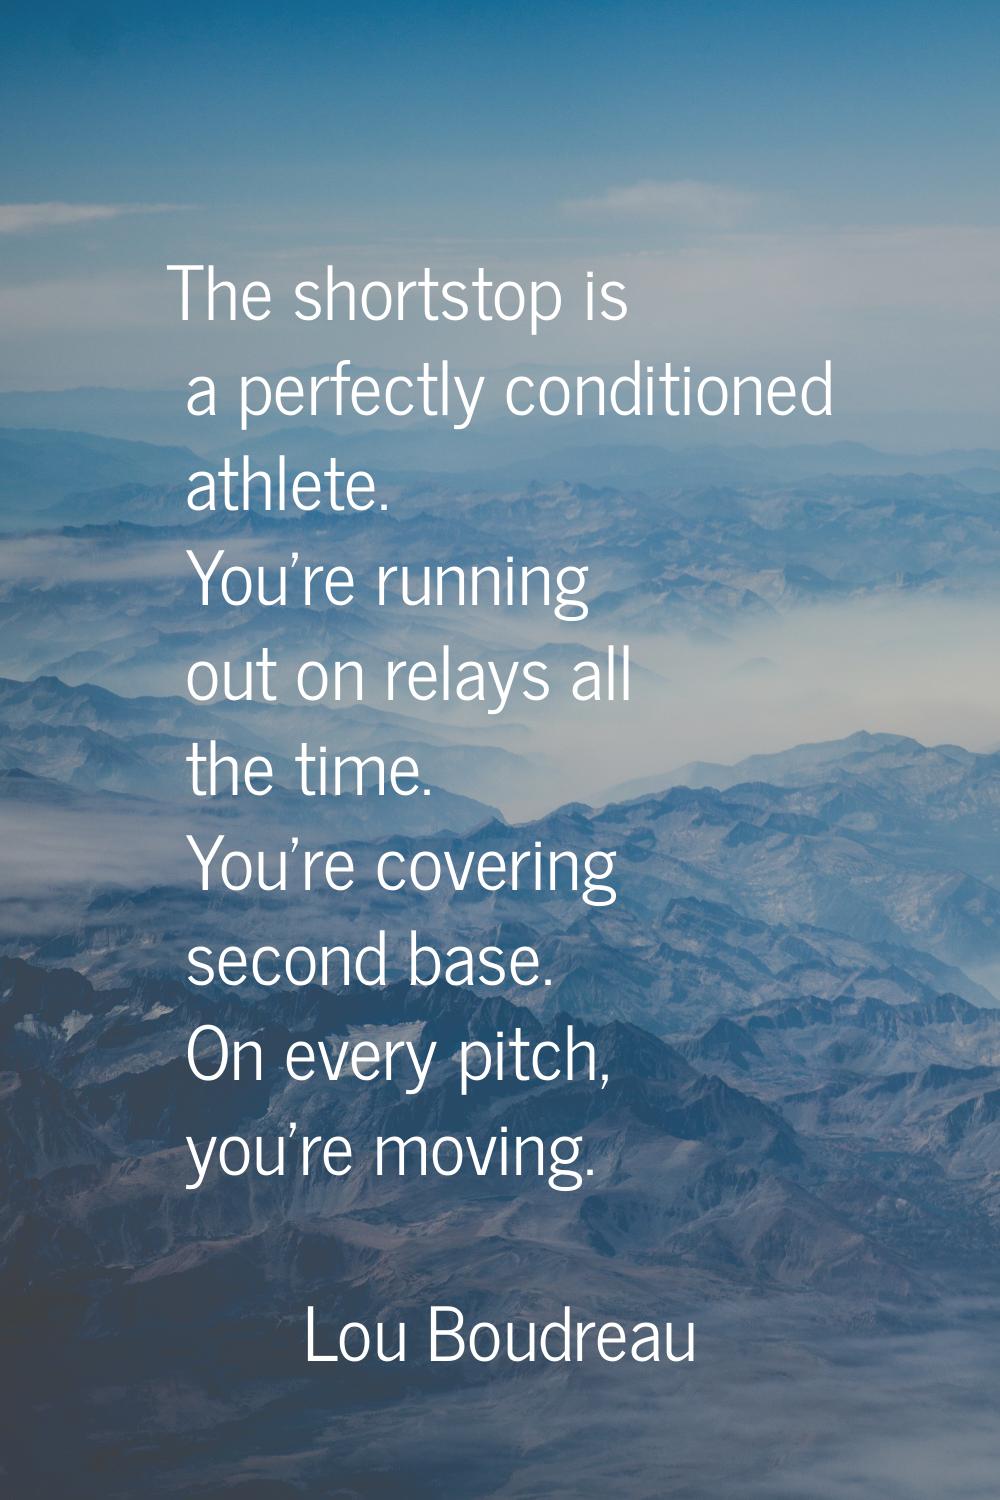 The shortstop is a perfectly conditioned athlete. You're running out on relays all the time. You're